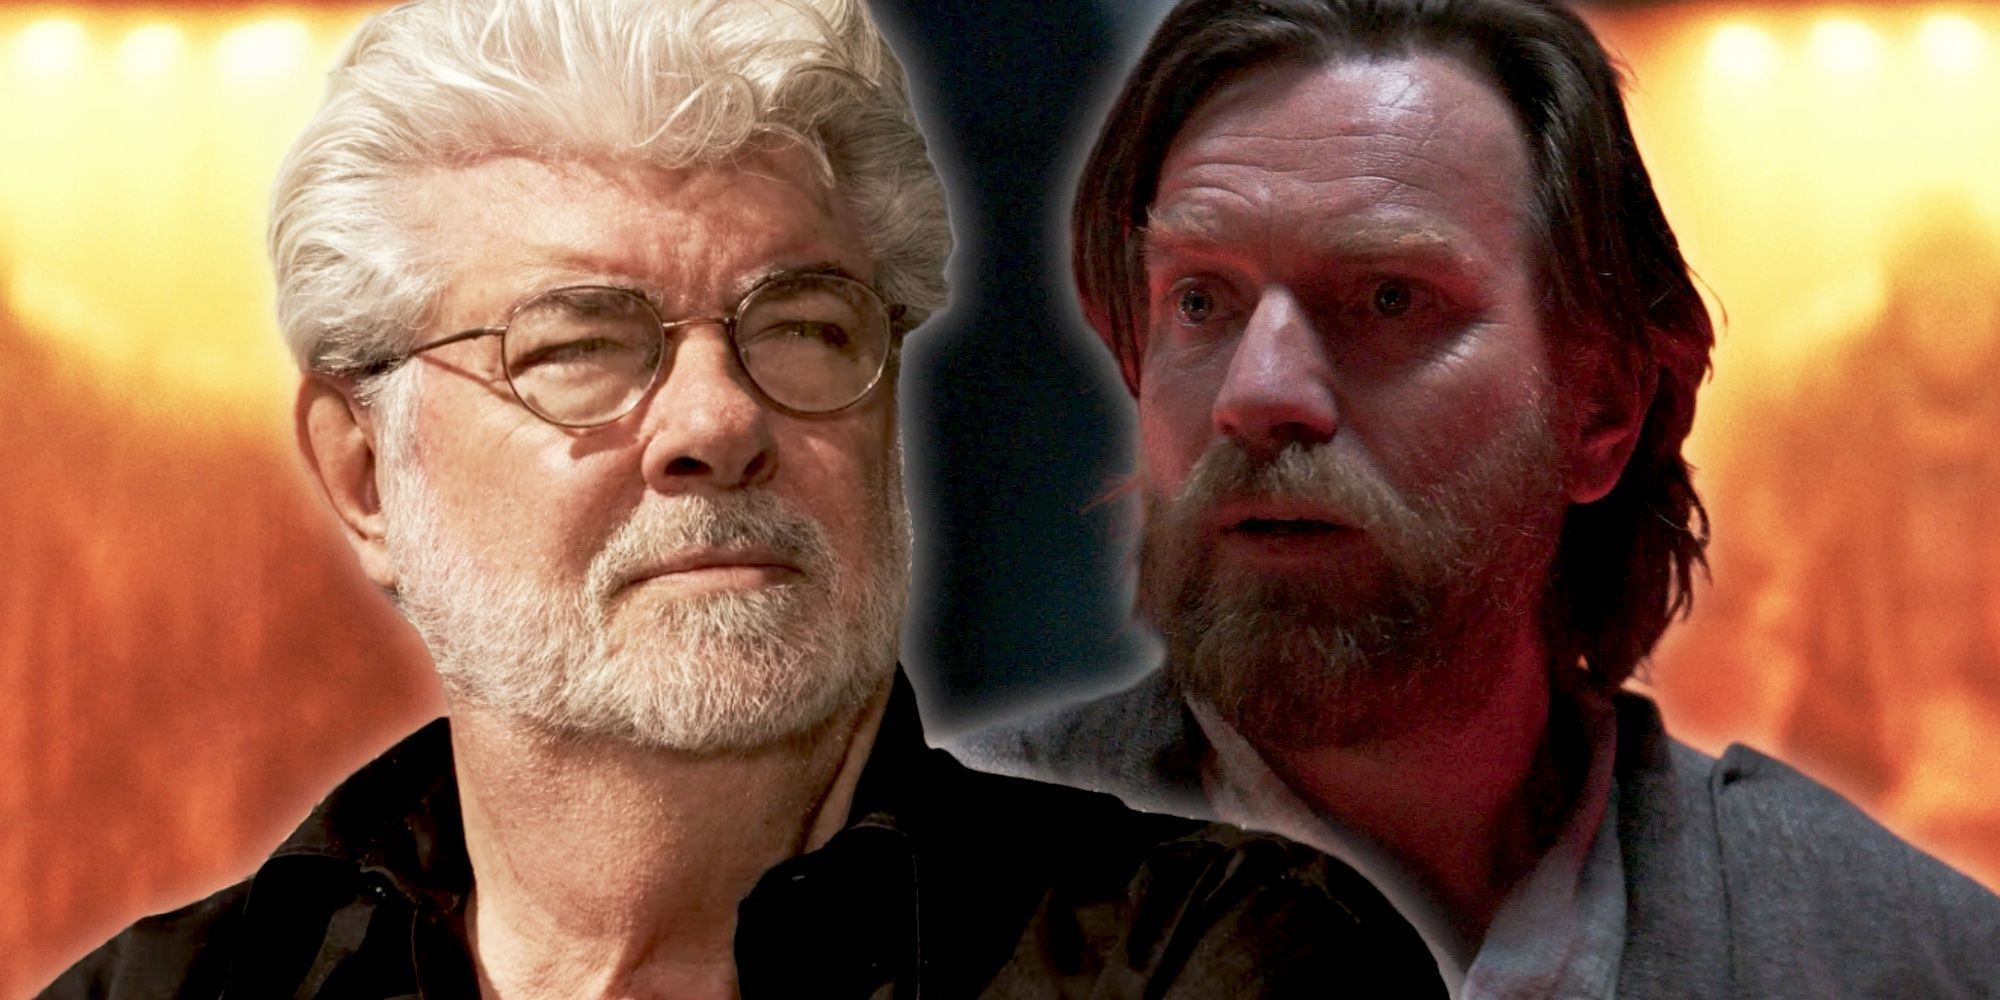 “One Of His Favorite Things”: George Lucas’ Thoughts On Obi-Wan Kenobi TV Series Revealed By Lucasfilm Exec